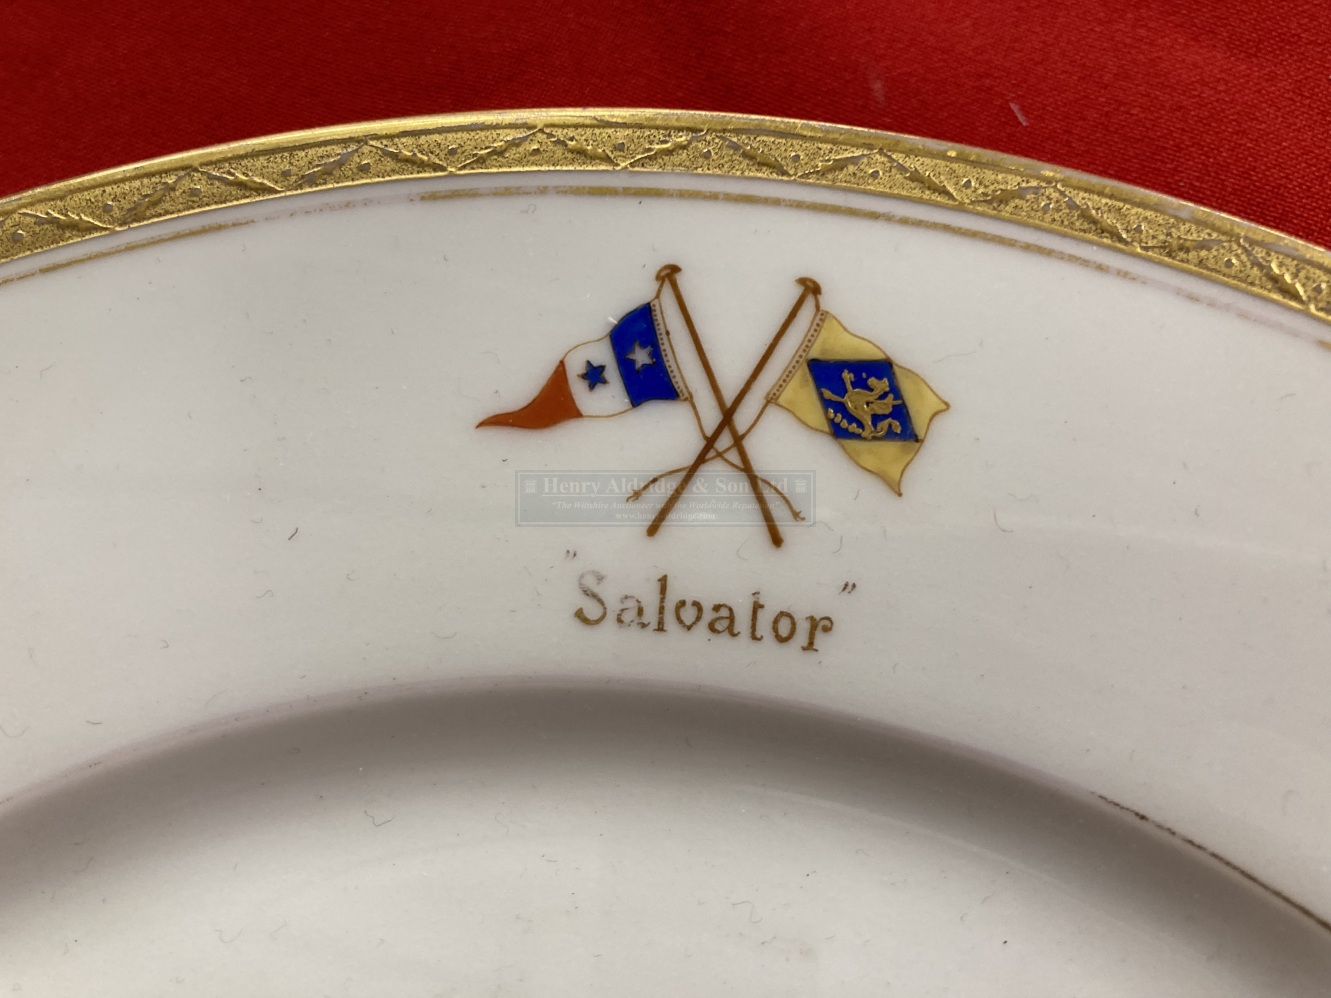 19th cent. Ceramics: Pair of dinner plates, gilt rimmed with crossed flags and Salvator makers label - Image 3 of 3